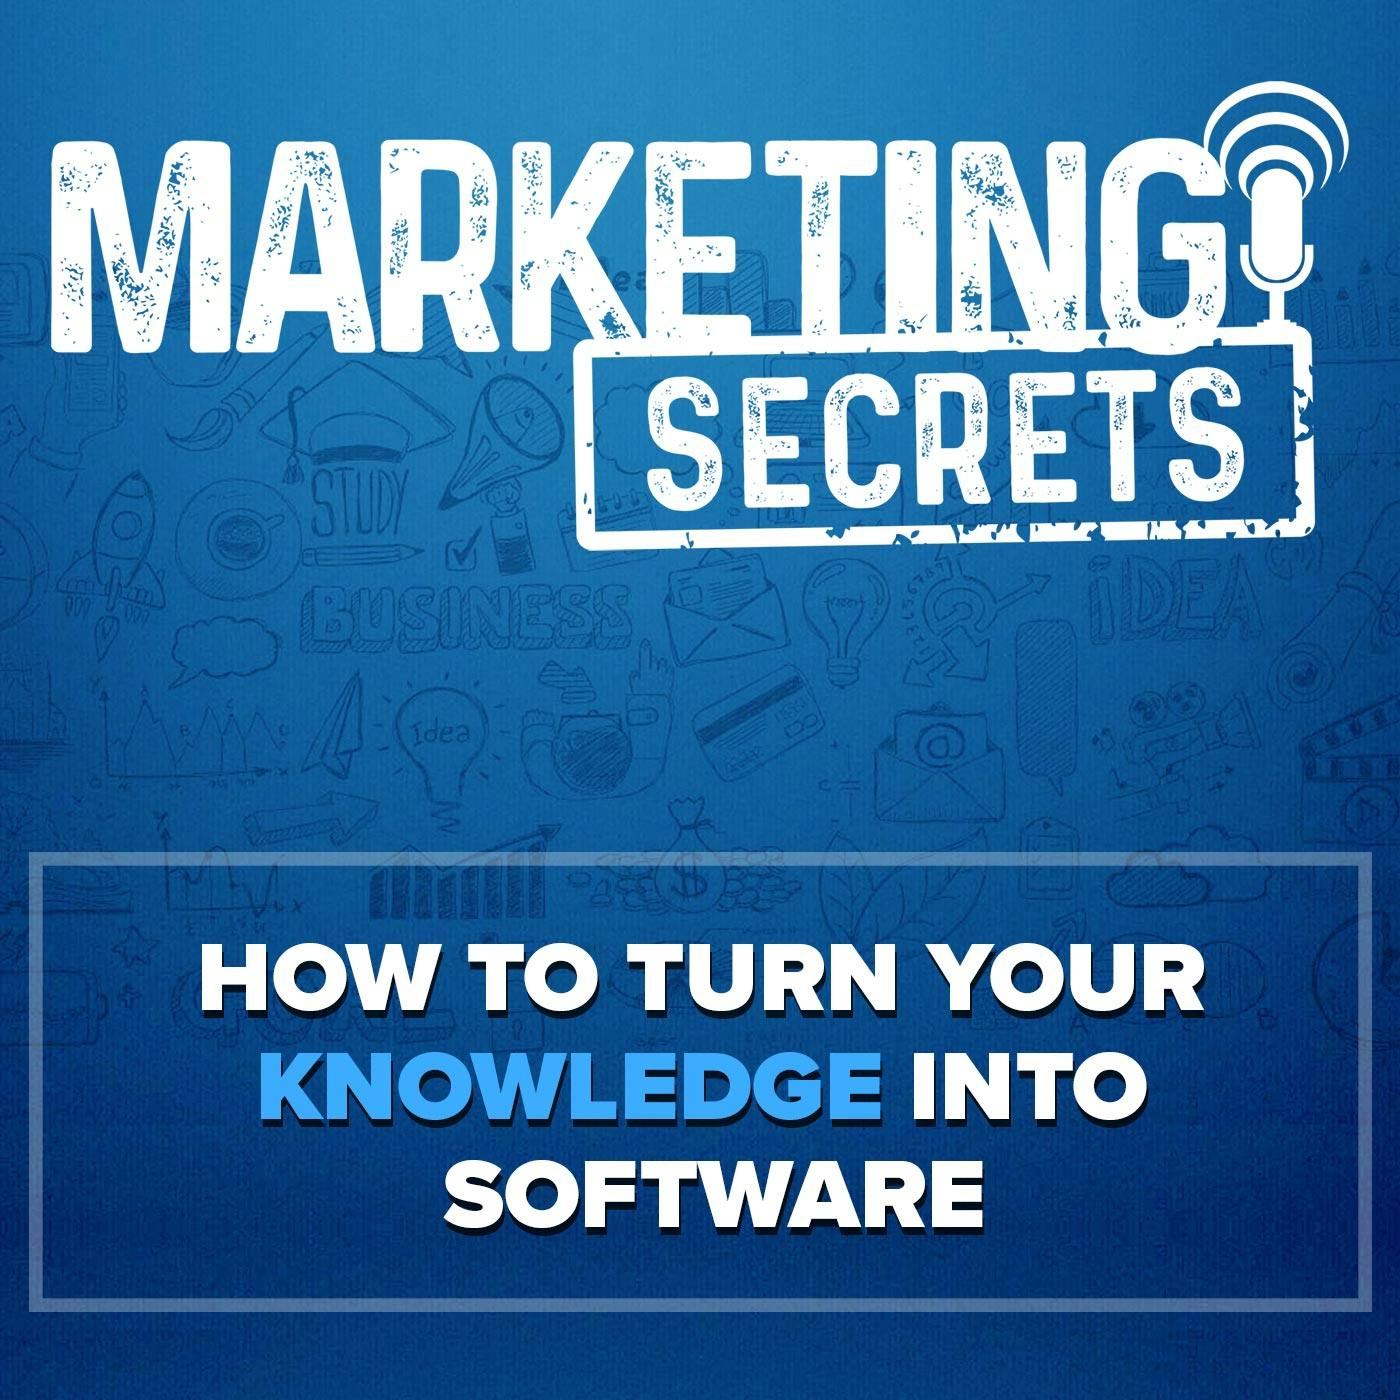 How to Turn Your Knowledge Into Software